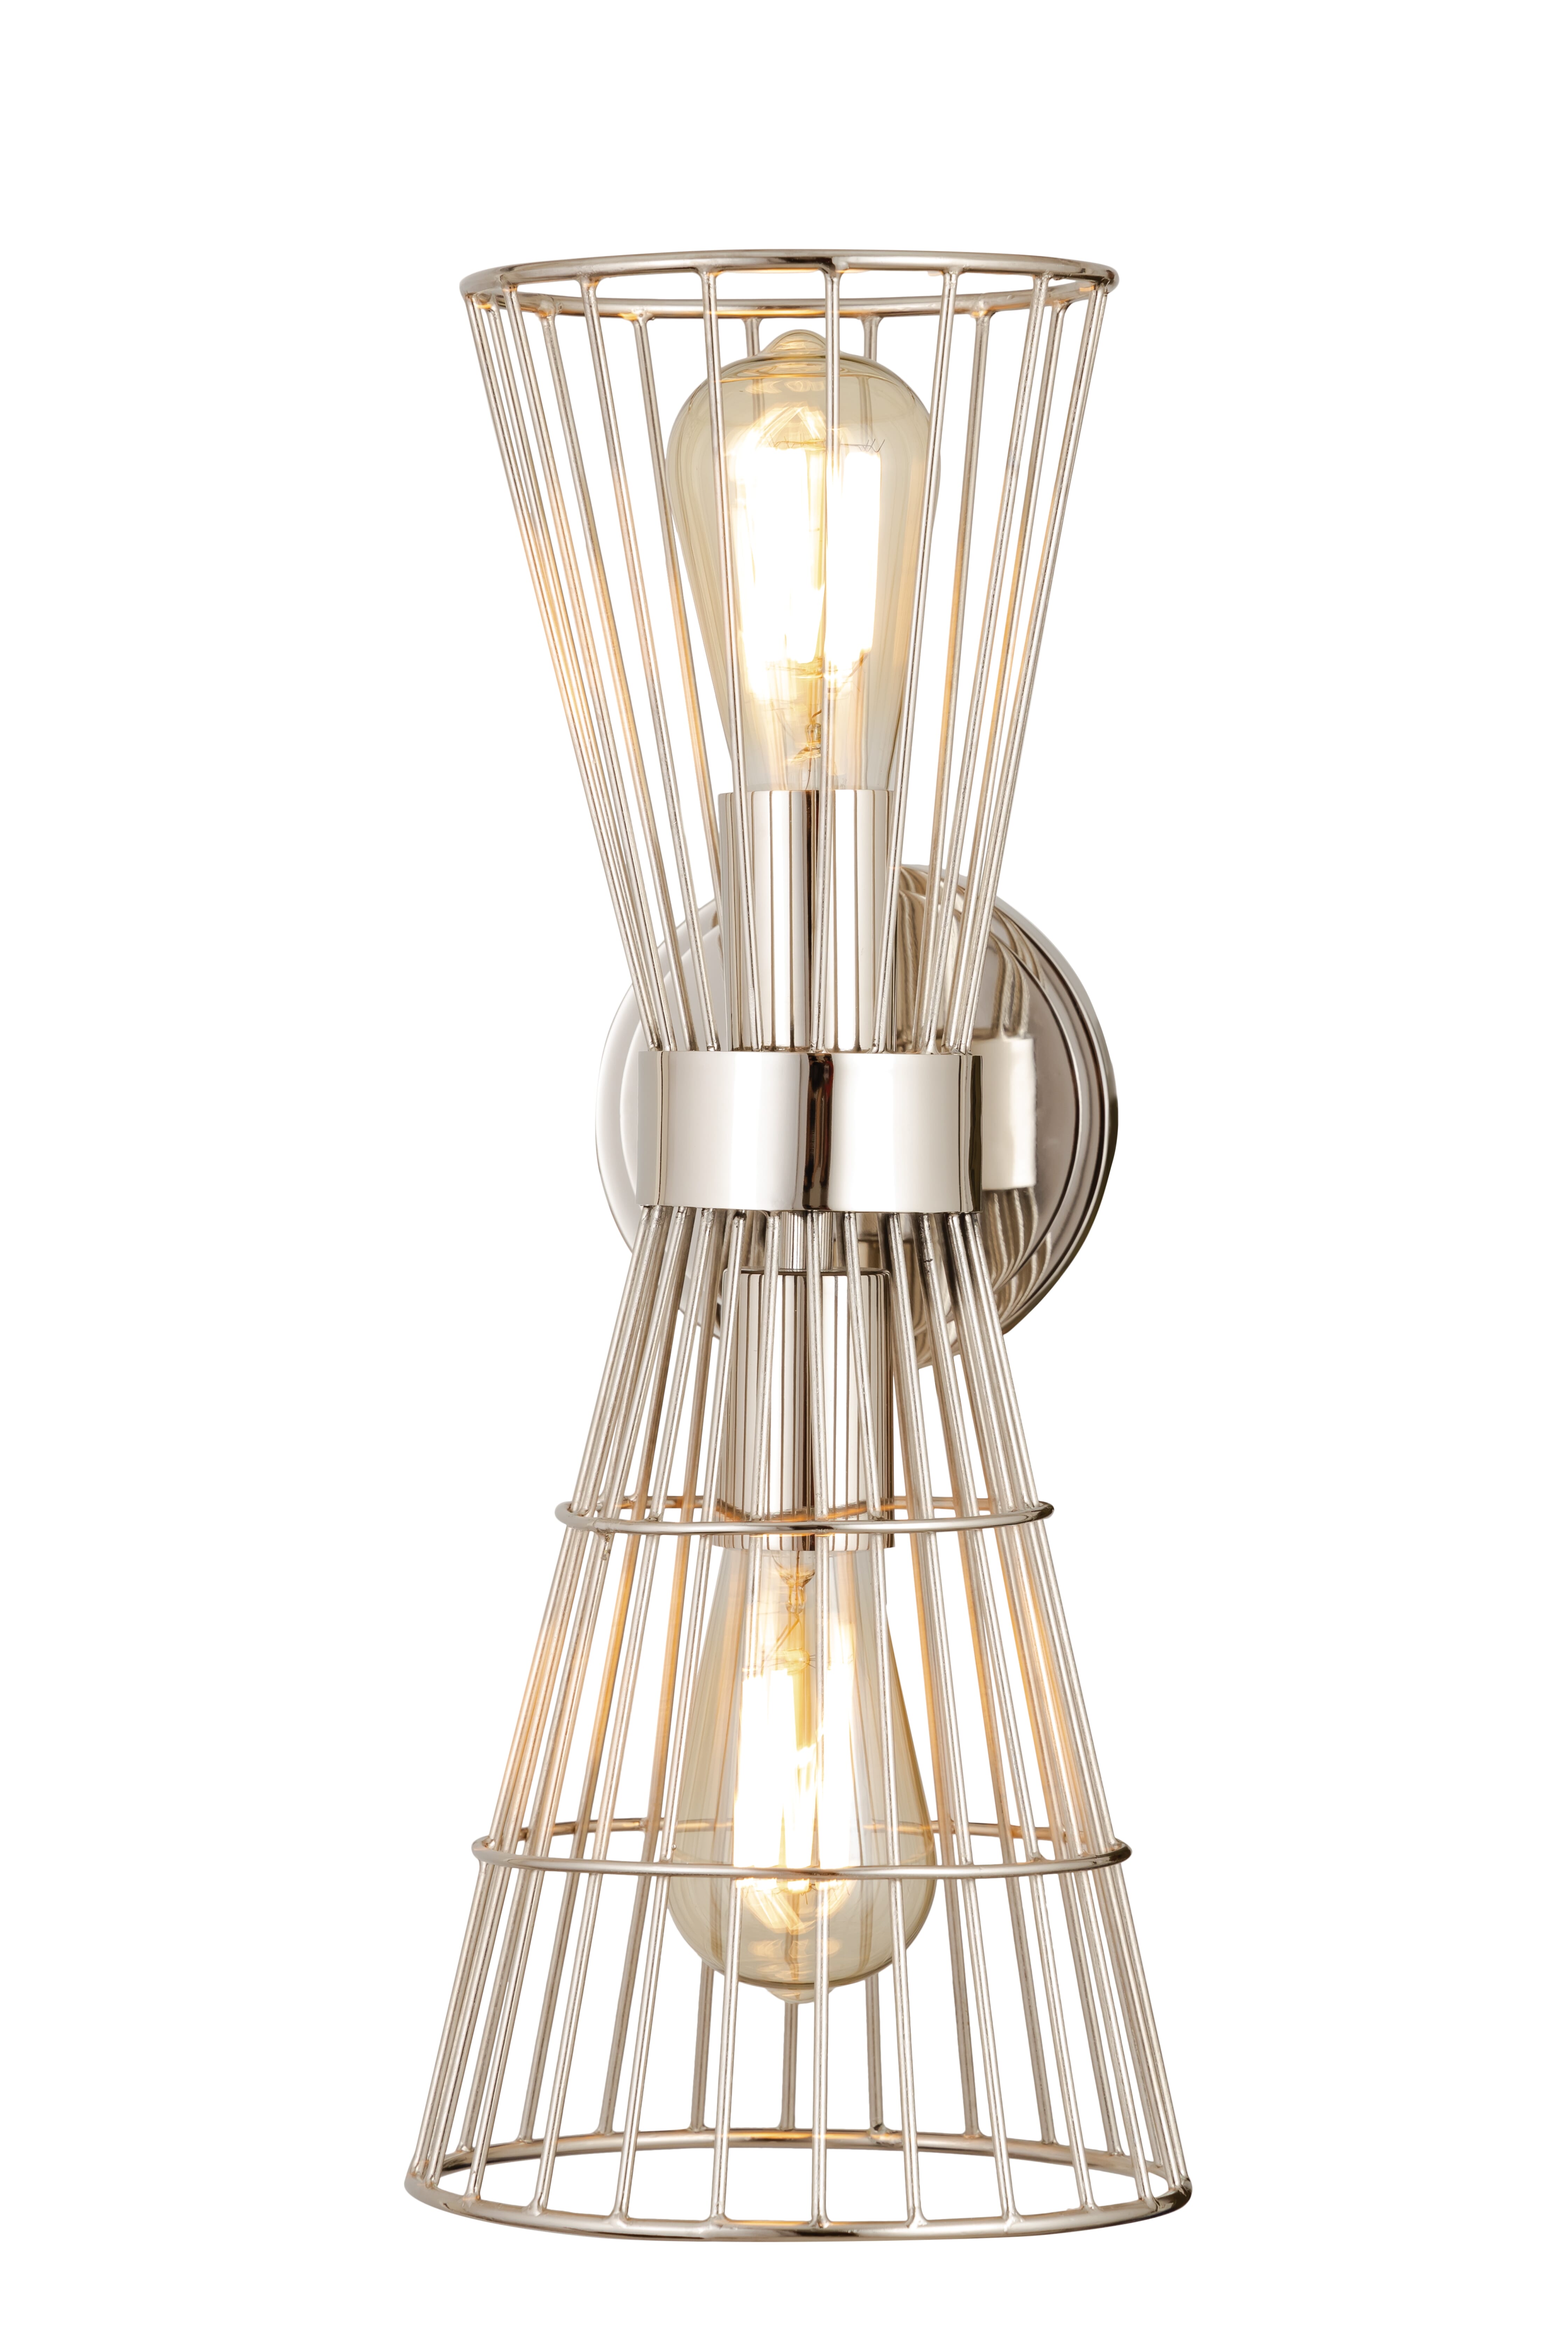 Alito 2-Light Wall Sconce In Polished Nickel